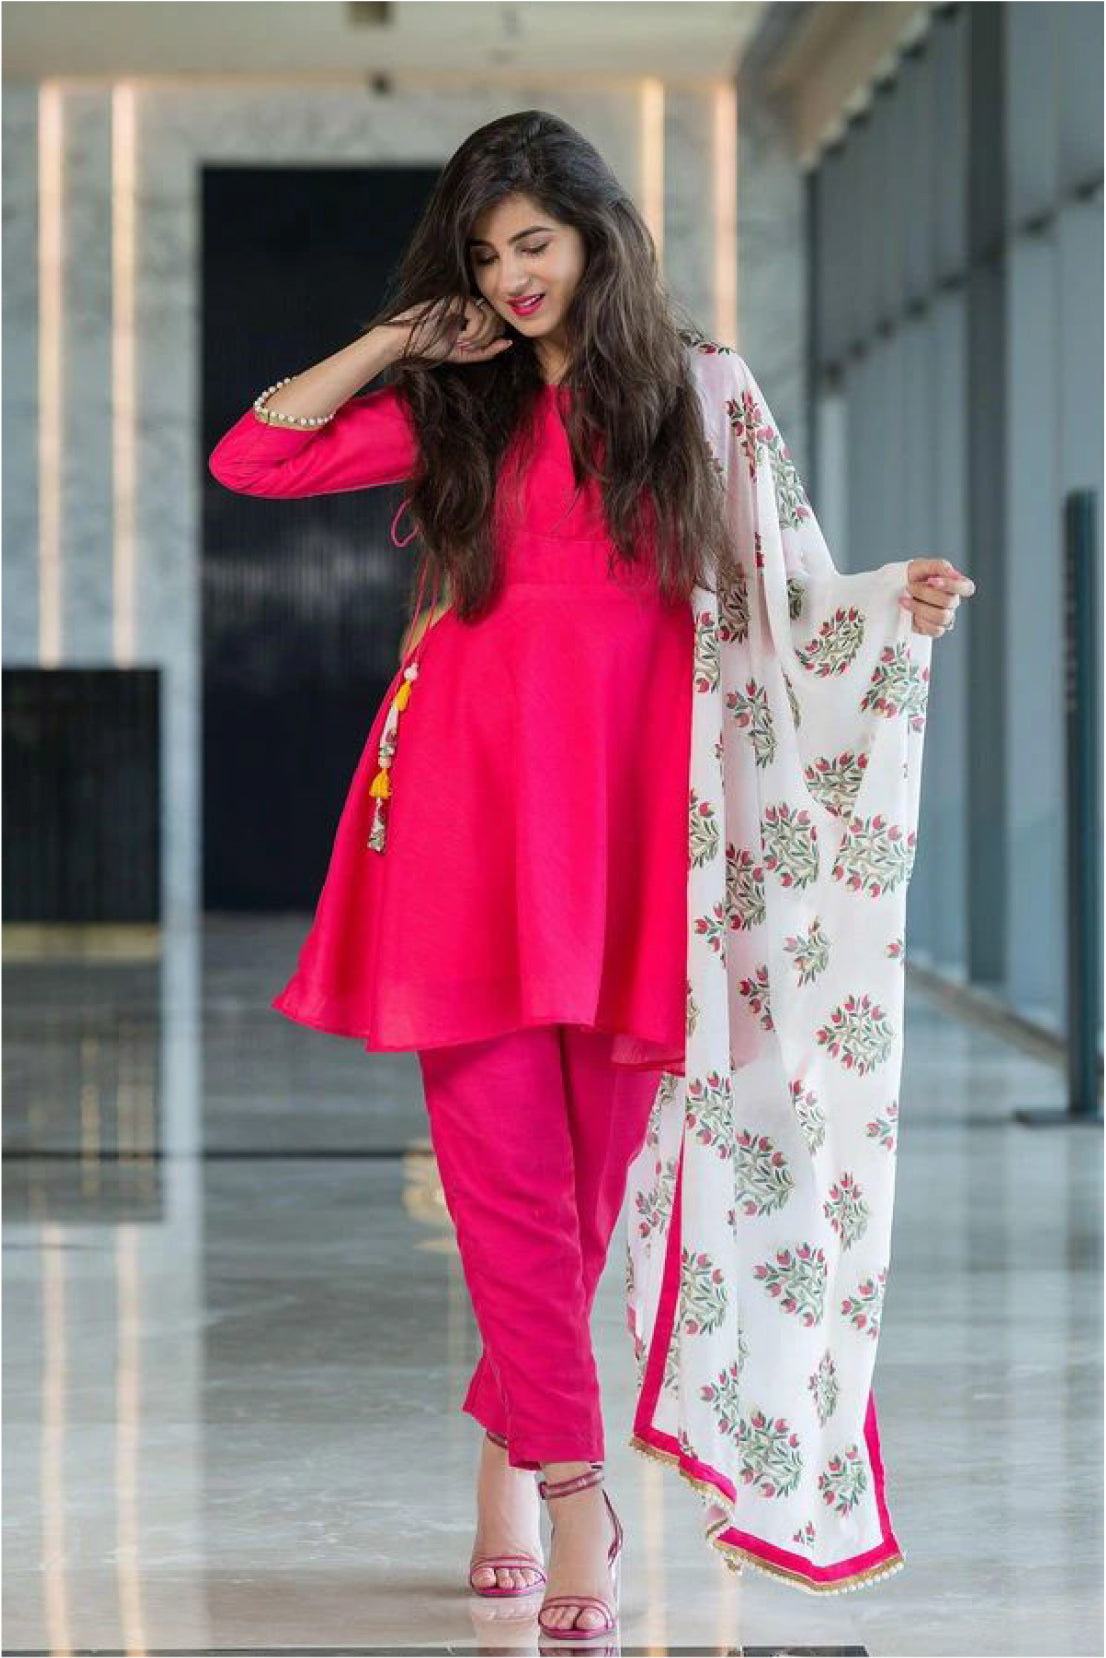 Look chic in Indian clothes!